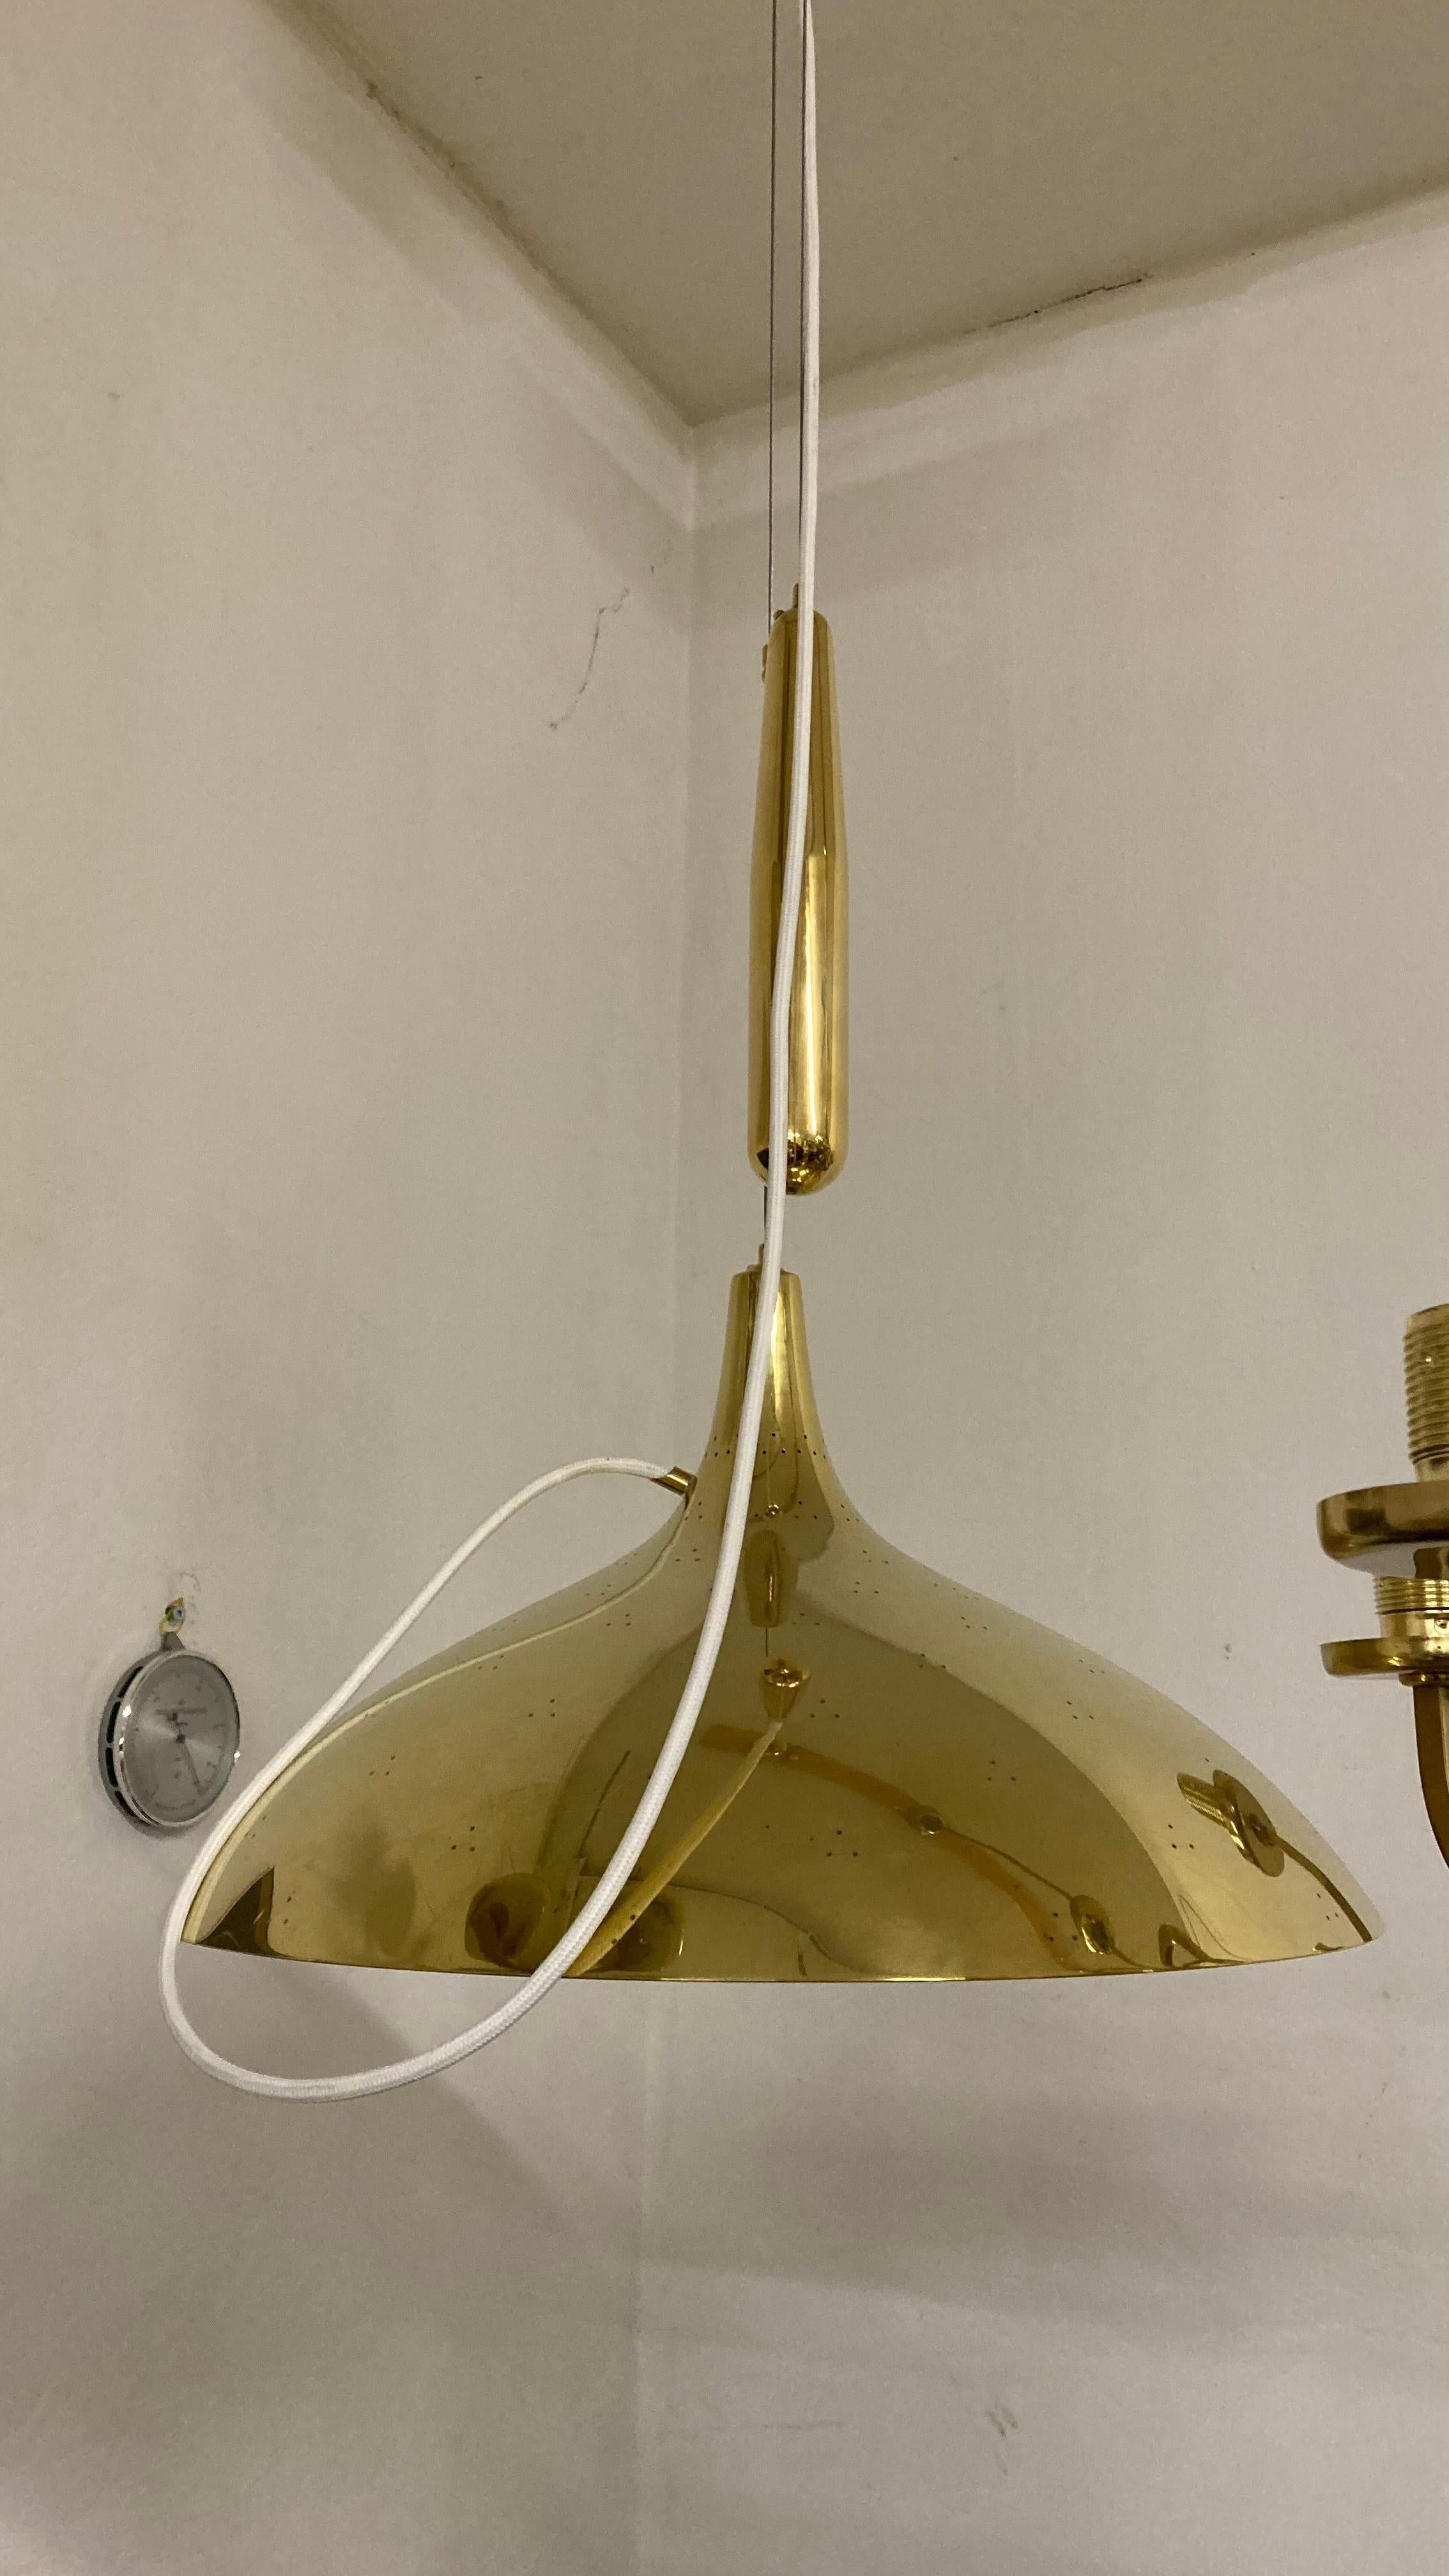 20th Century Paavo Tynell, brass counterweight light A1965 for TAITO Oy